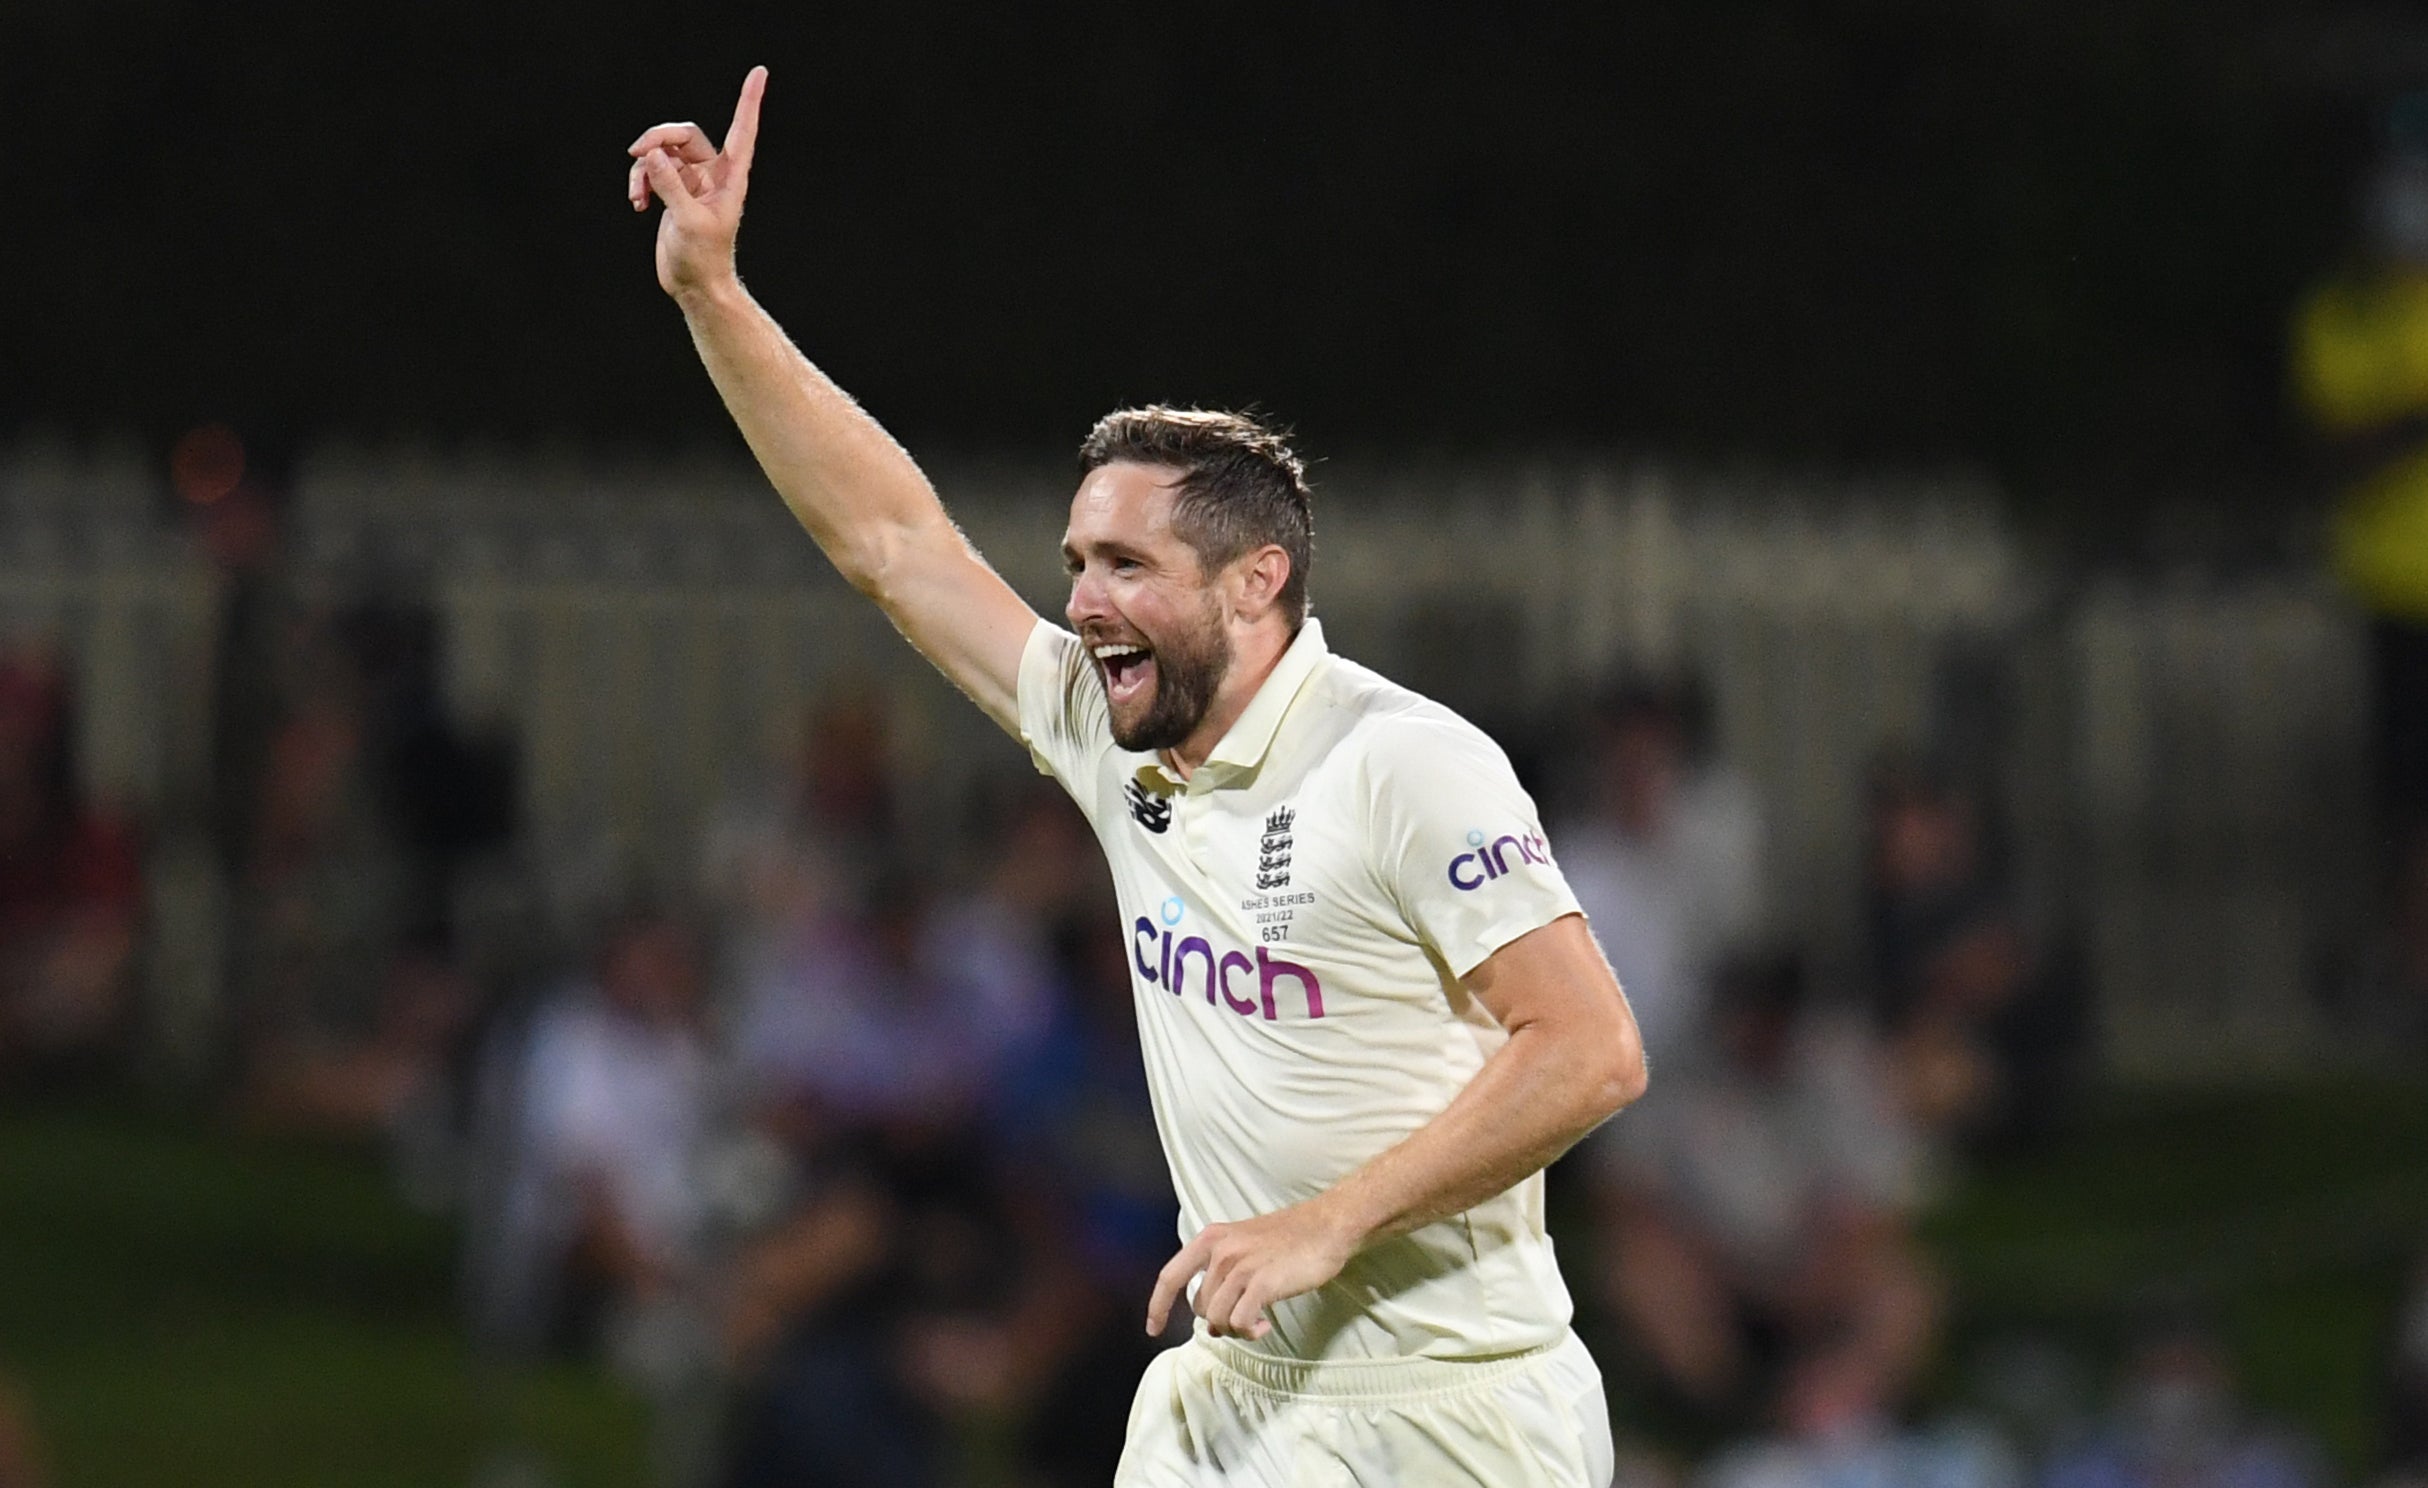 Chris Woakes has not played since the West Indies series in March (Darren England via AAP/PA)